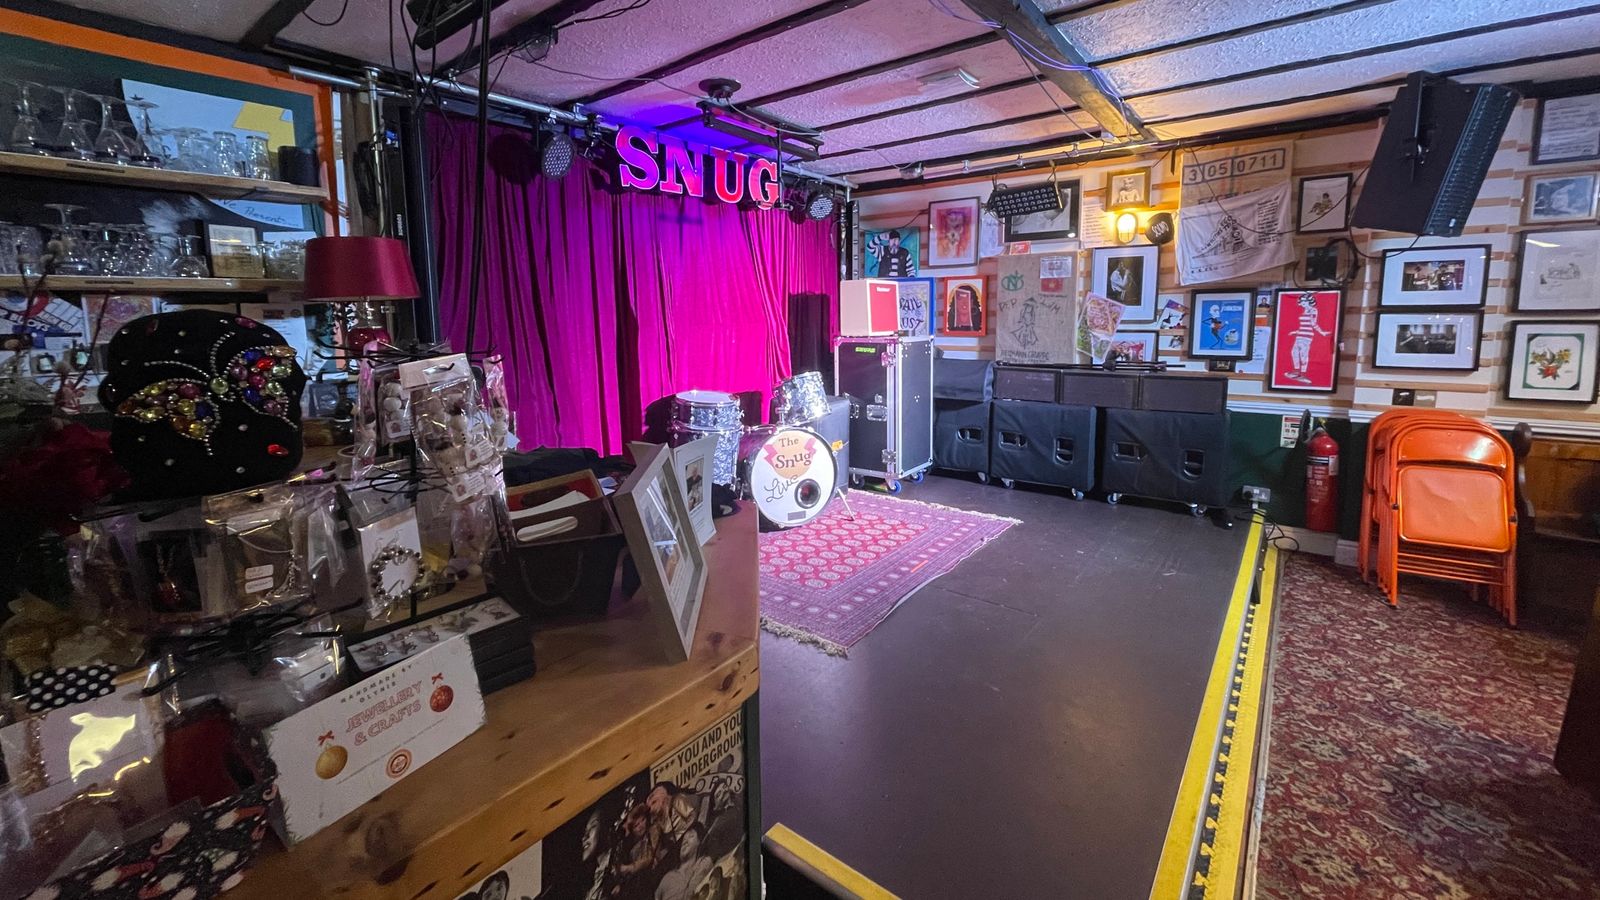 Requires area ticket levy and tax aid to cease music venue closure ‘disaster’